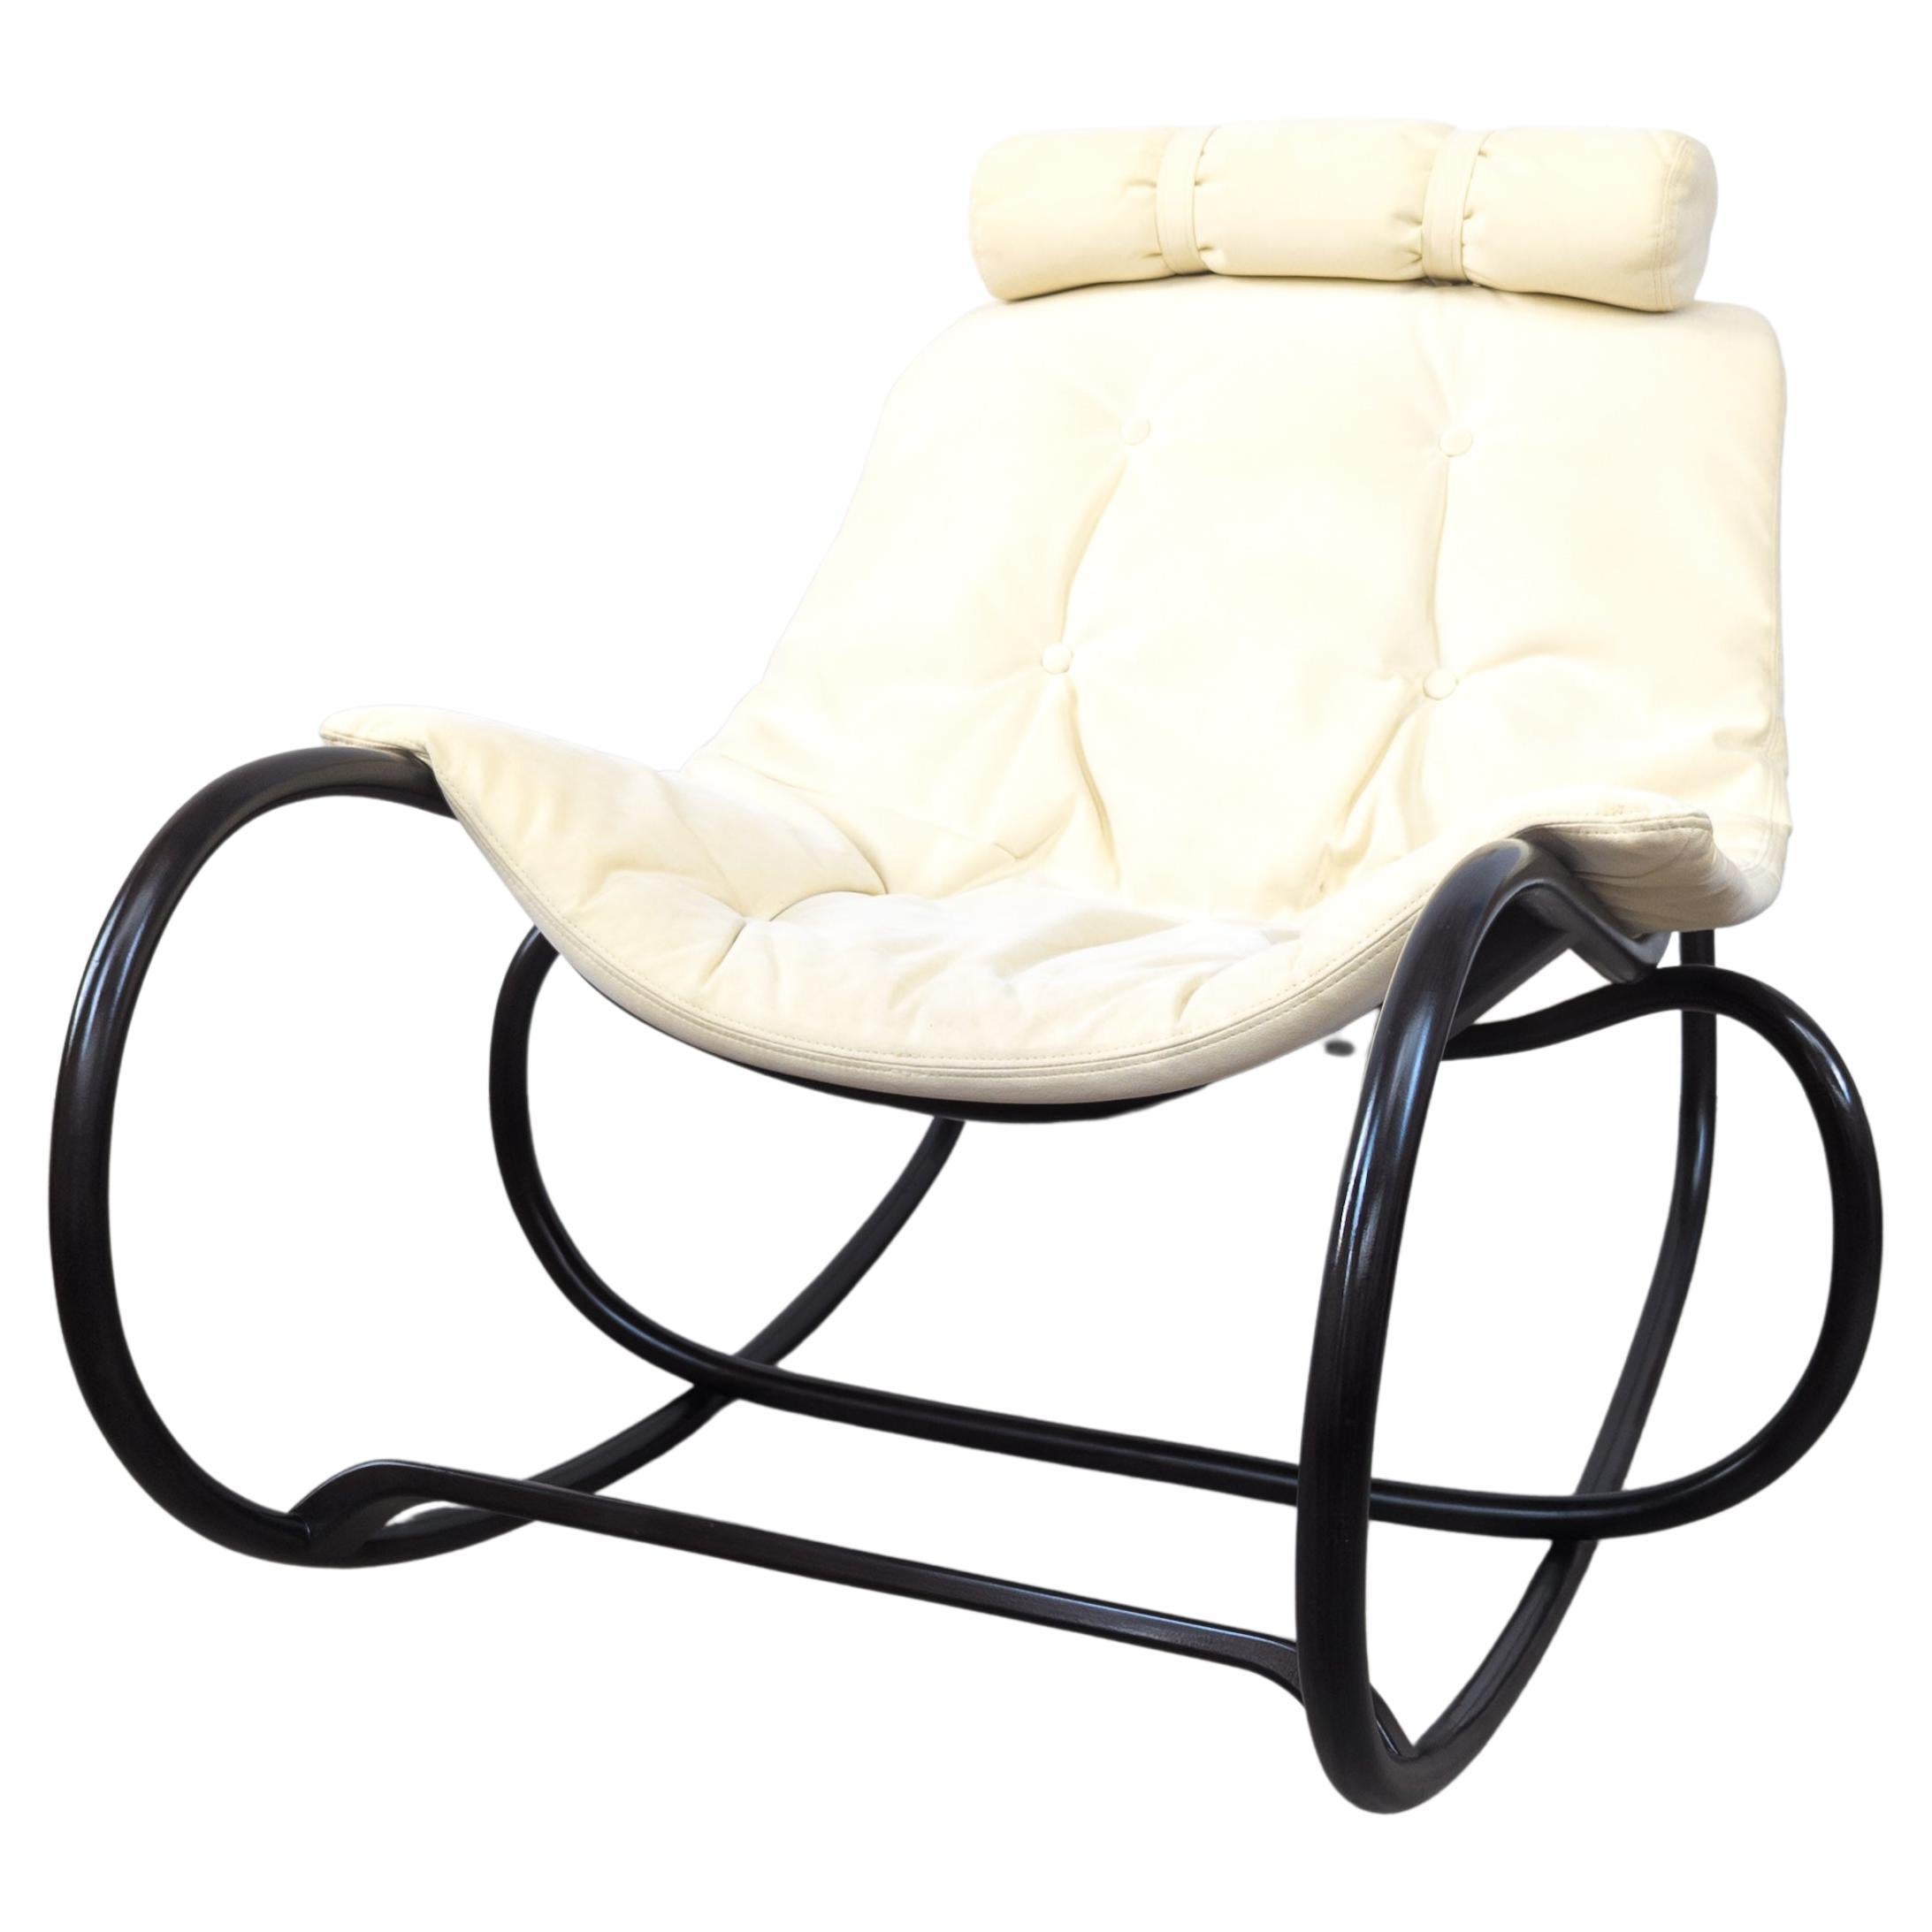 TON a.s. Lounge Chairs